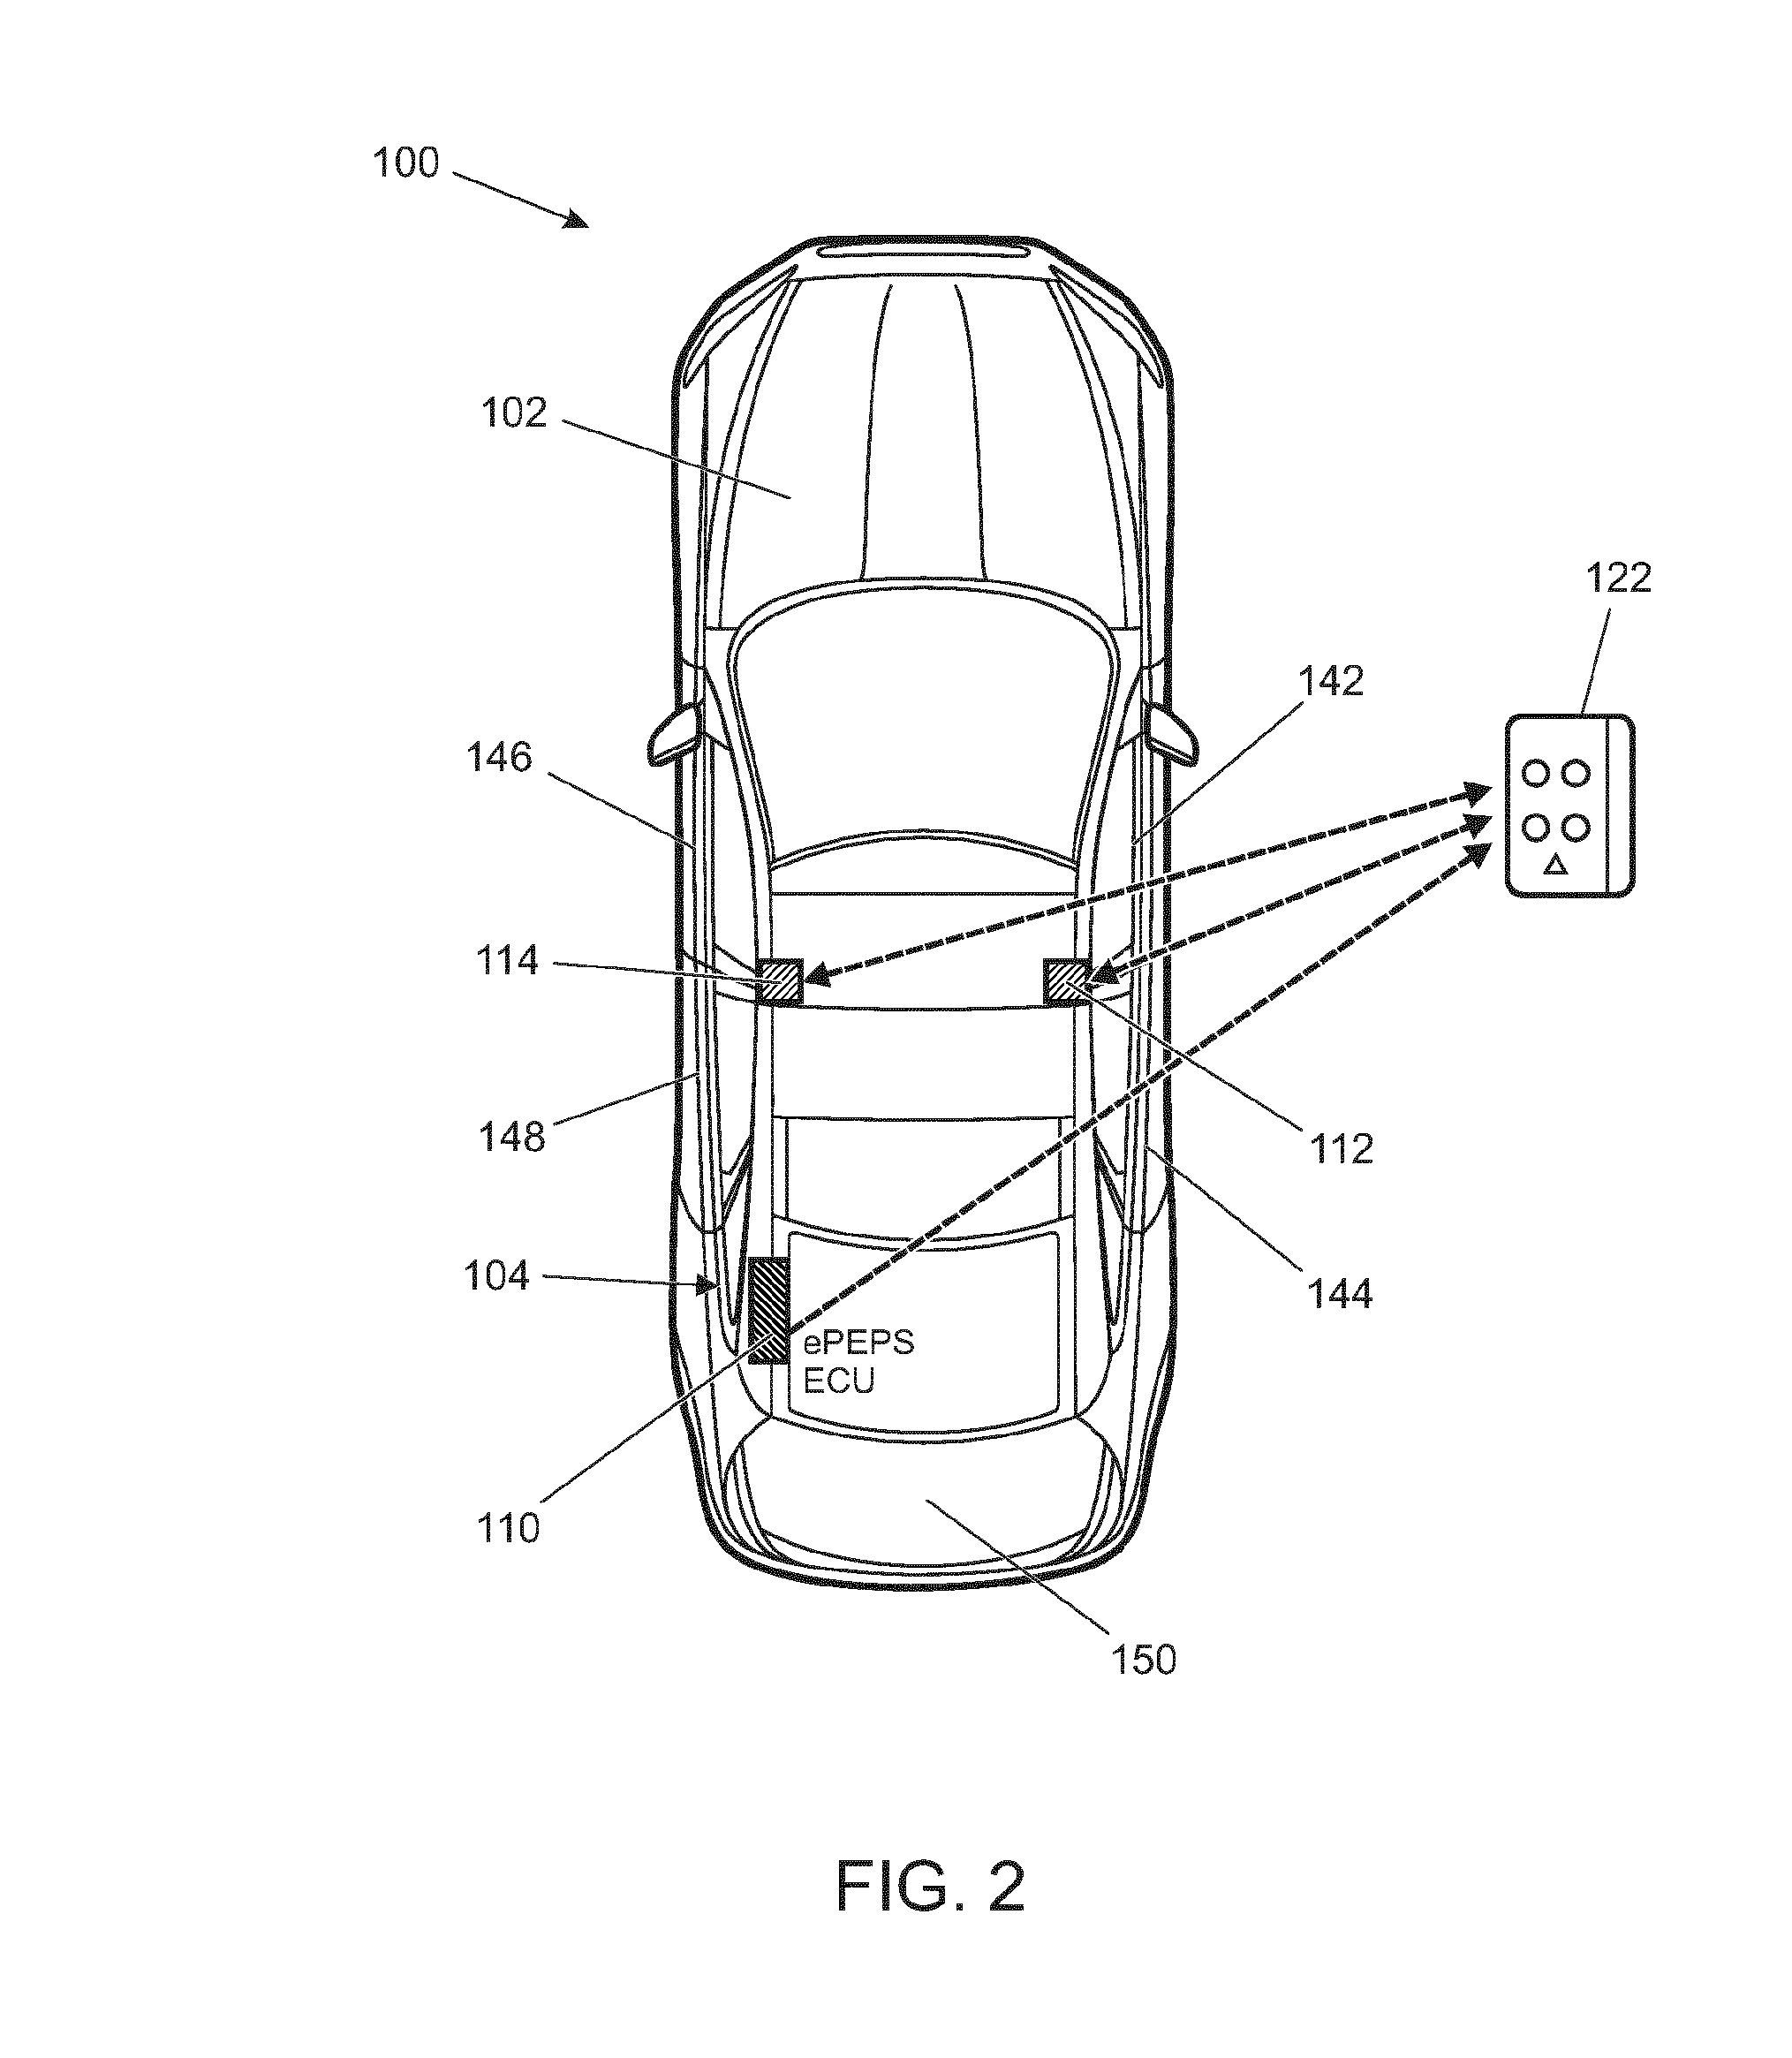 Movement Pattern Detection in a Vehicle Communication System